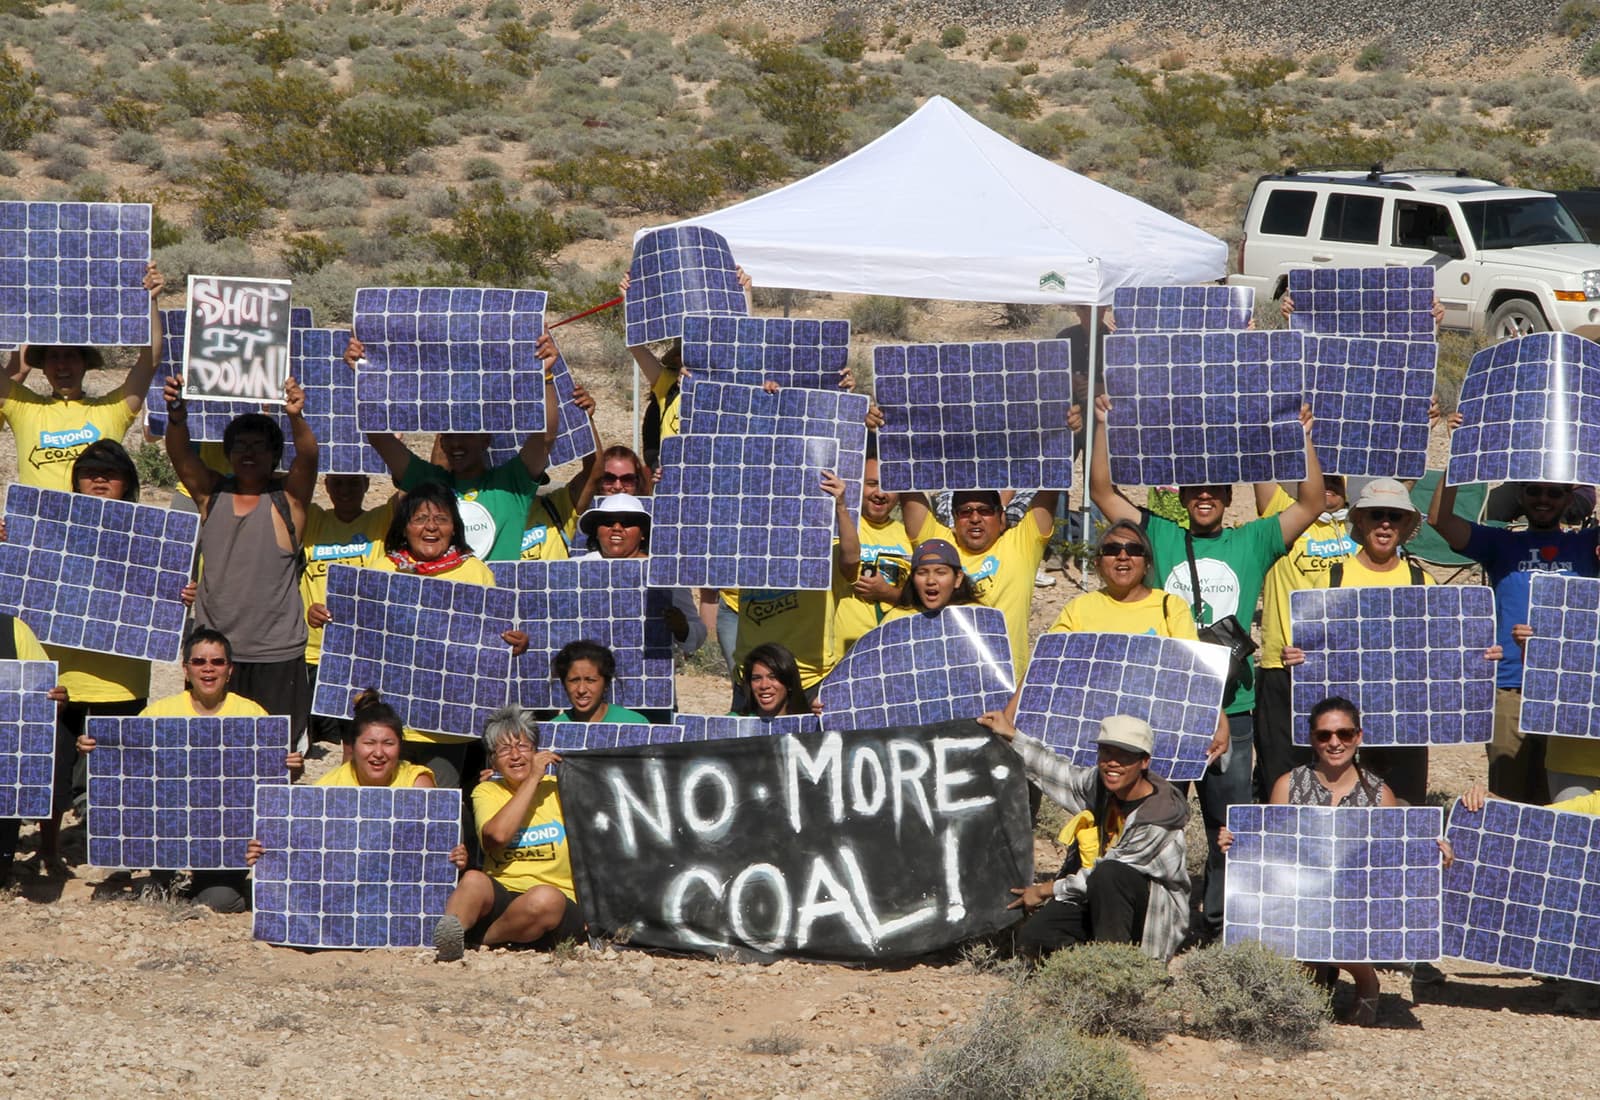 Volunteers in Nevada organizing grassroots efforts to support the closure of coal-fired power plants as part of the Beyond Coal campaign.